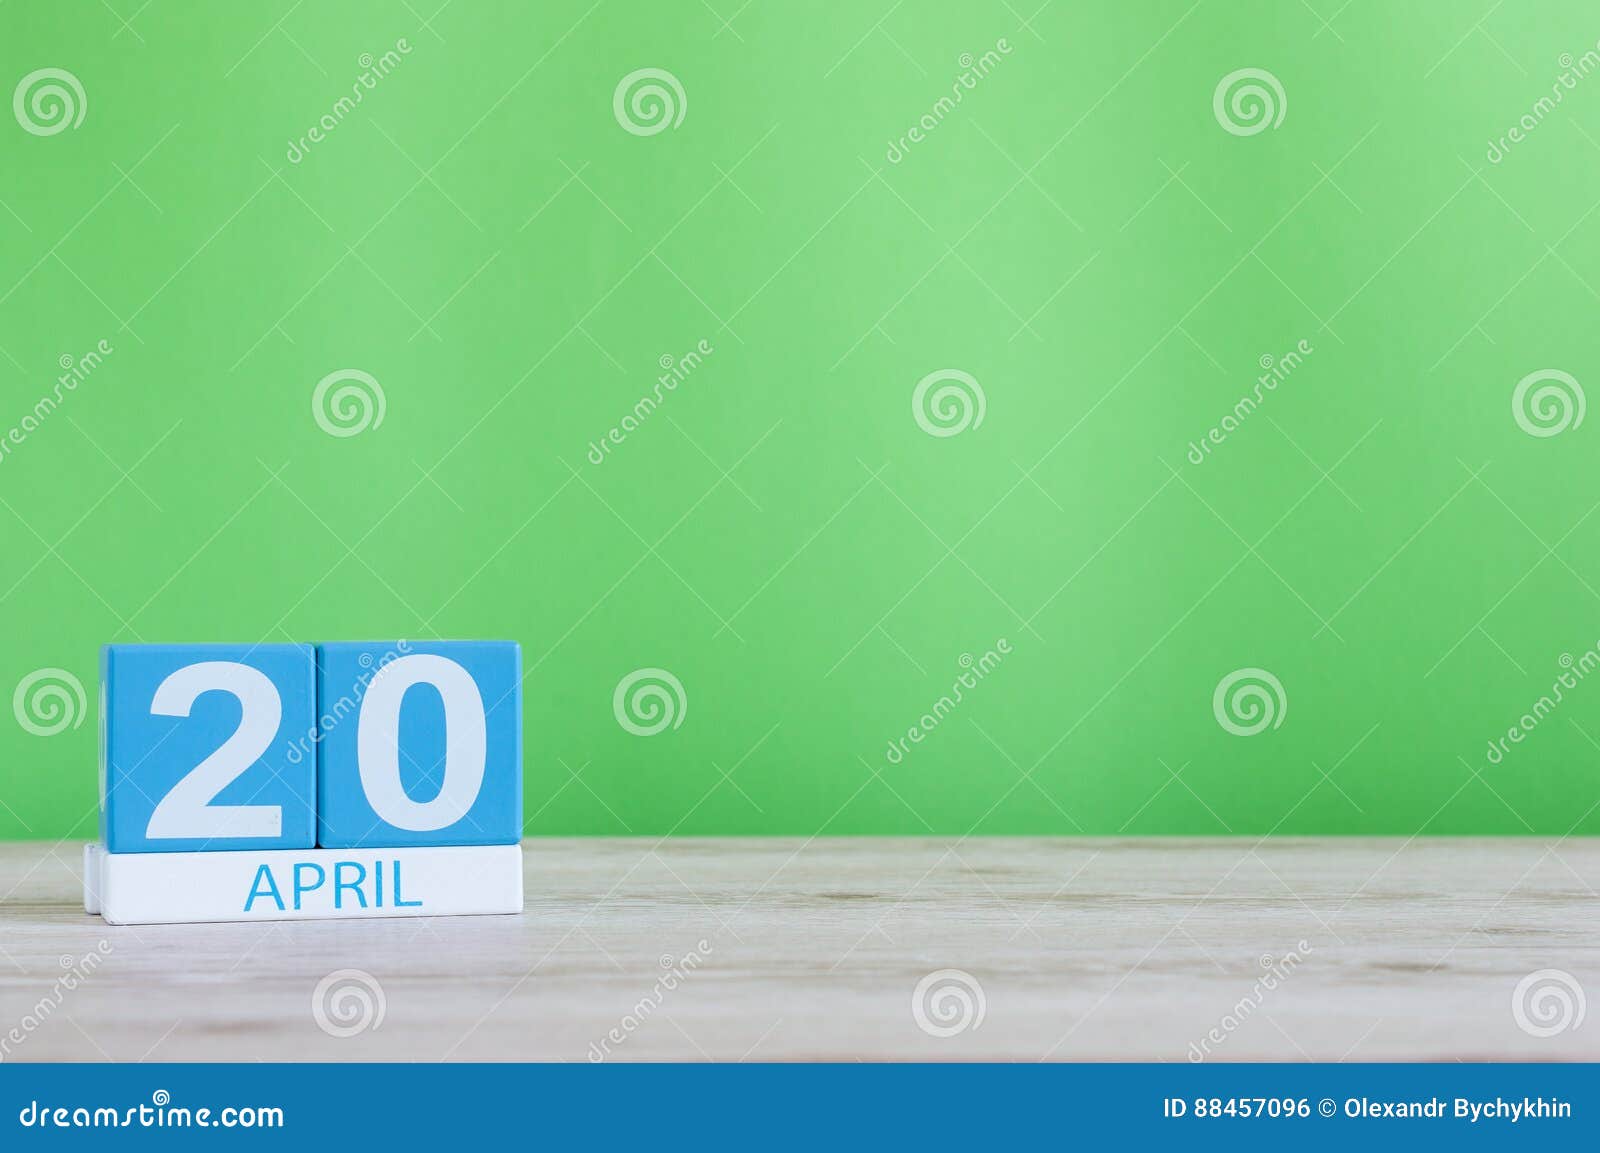 April 20th Day 20 Of Month Calendar On Wooden Table And Green